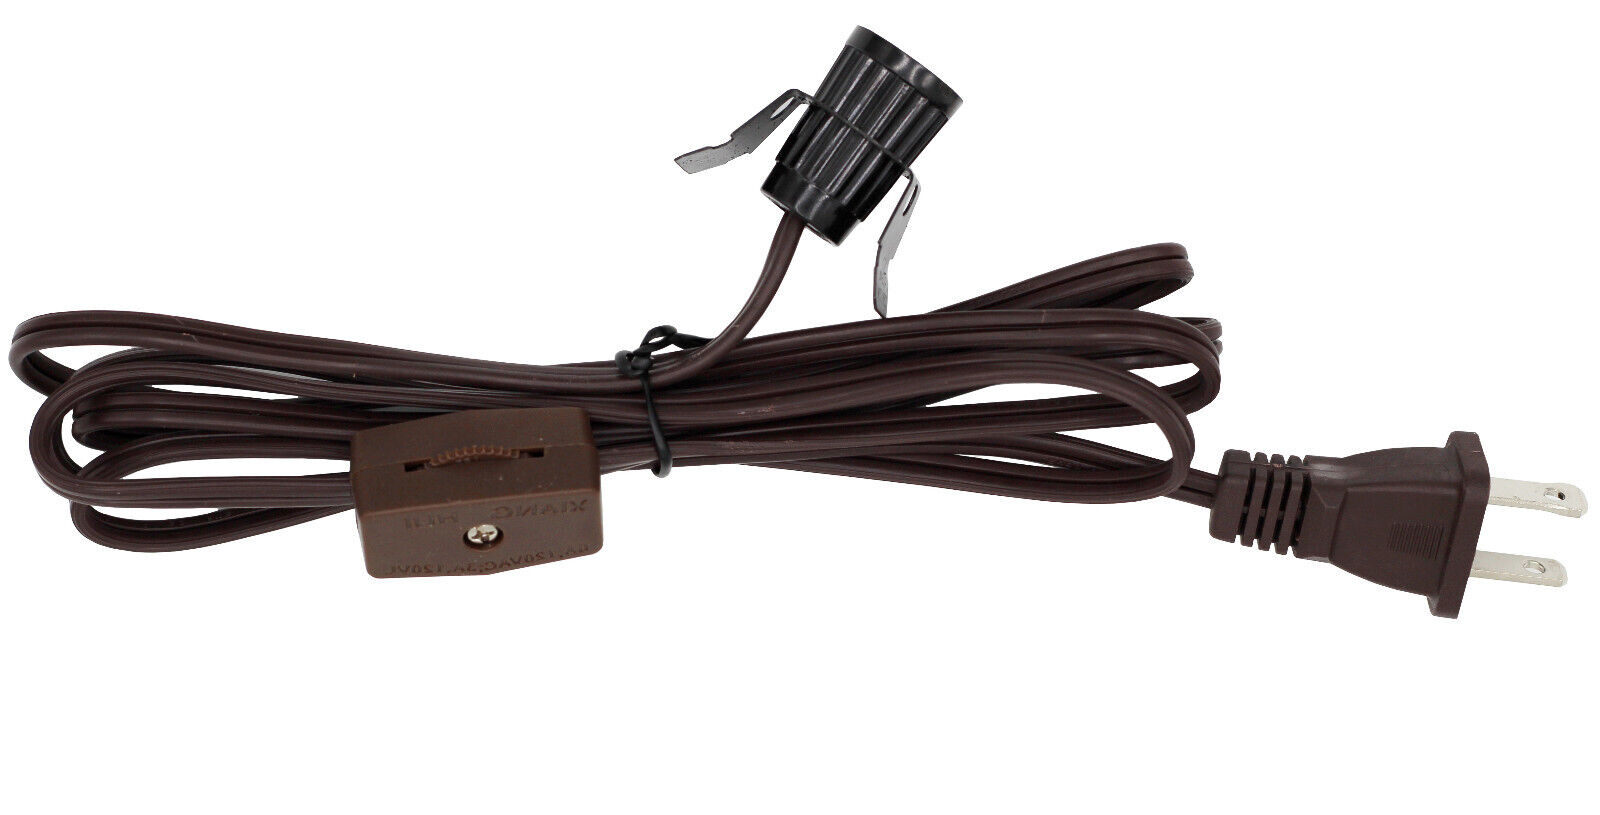 Brown Clip-In Lamp Cords, 6 Foot with On/Off Switch -Wholesale Pack of 10 Cords